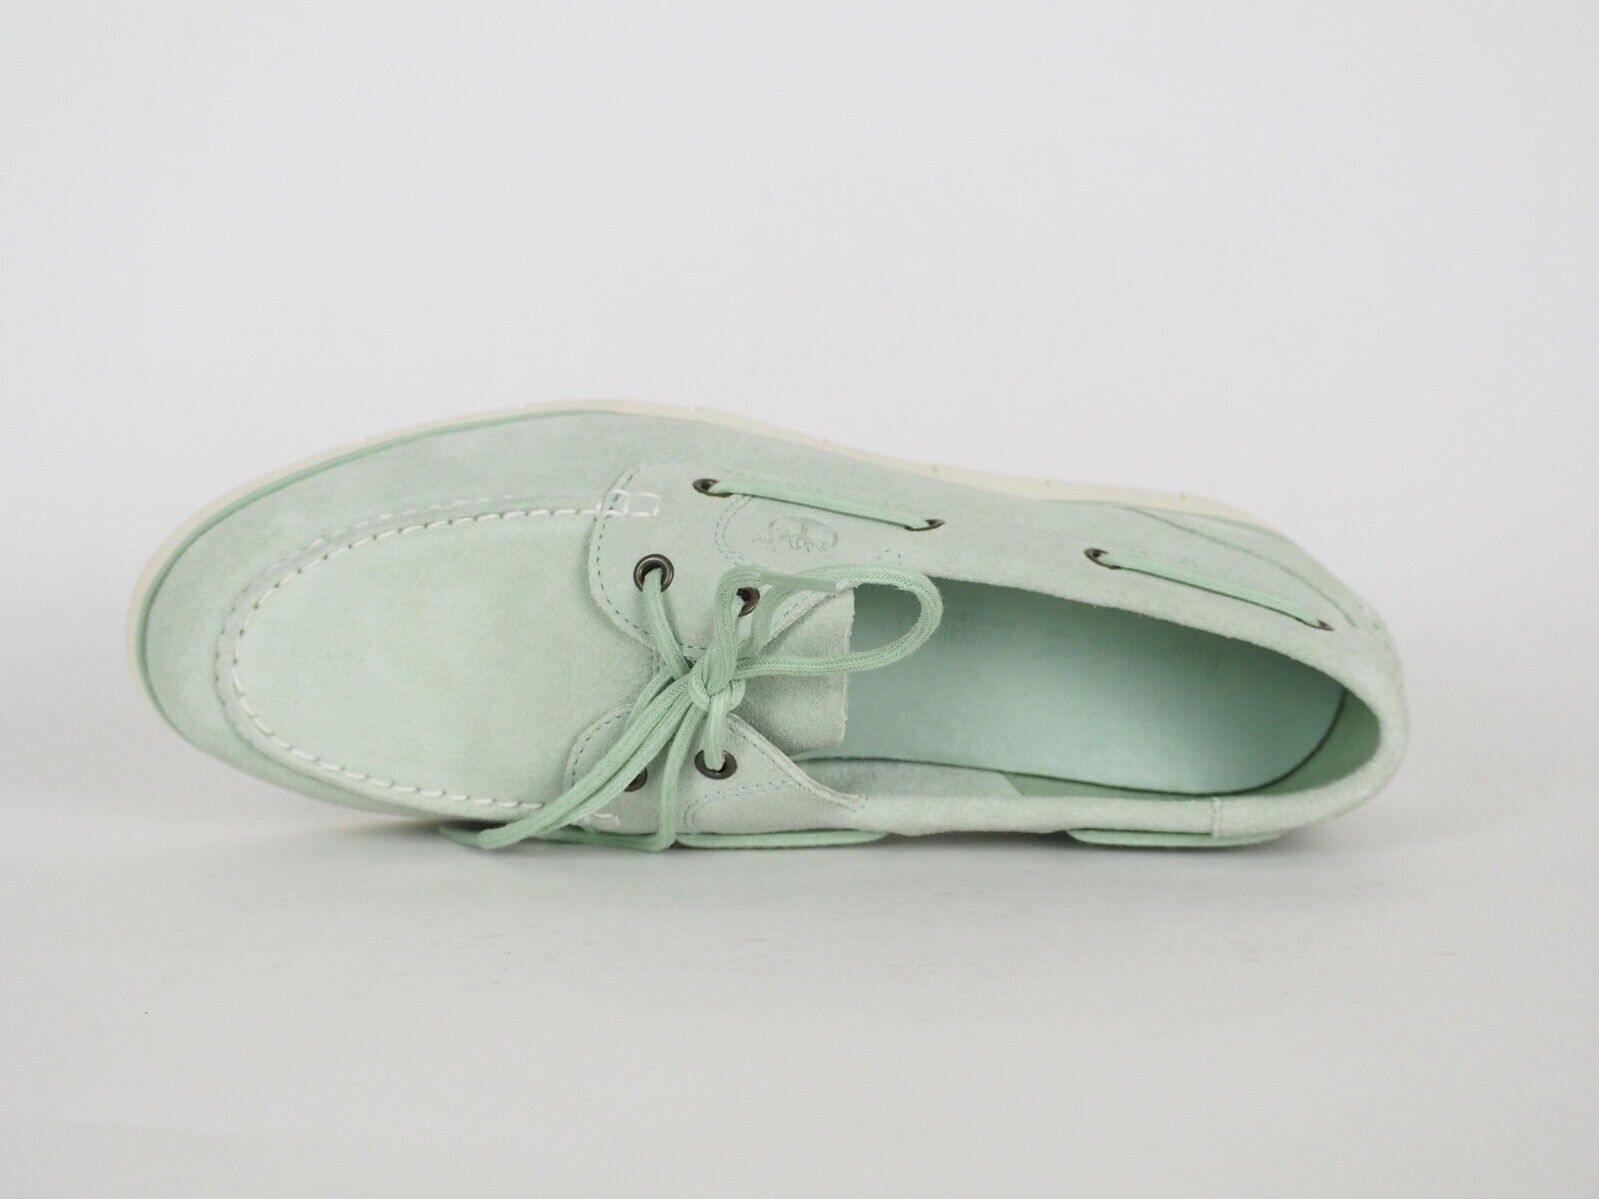 Womens Timberland Lakeville A1GDF Silt Green Suede Moccasin Boat Shoes - London Top Style